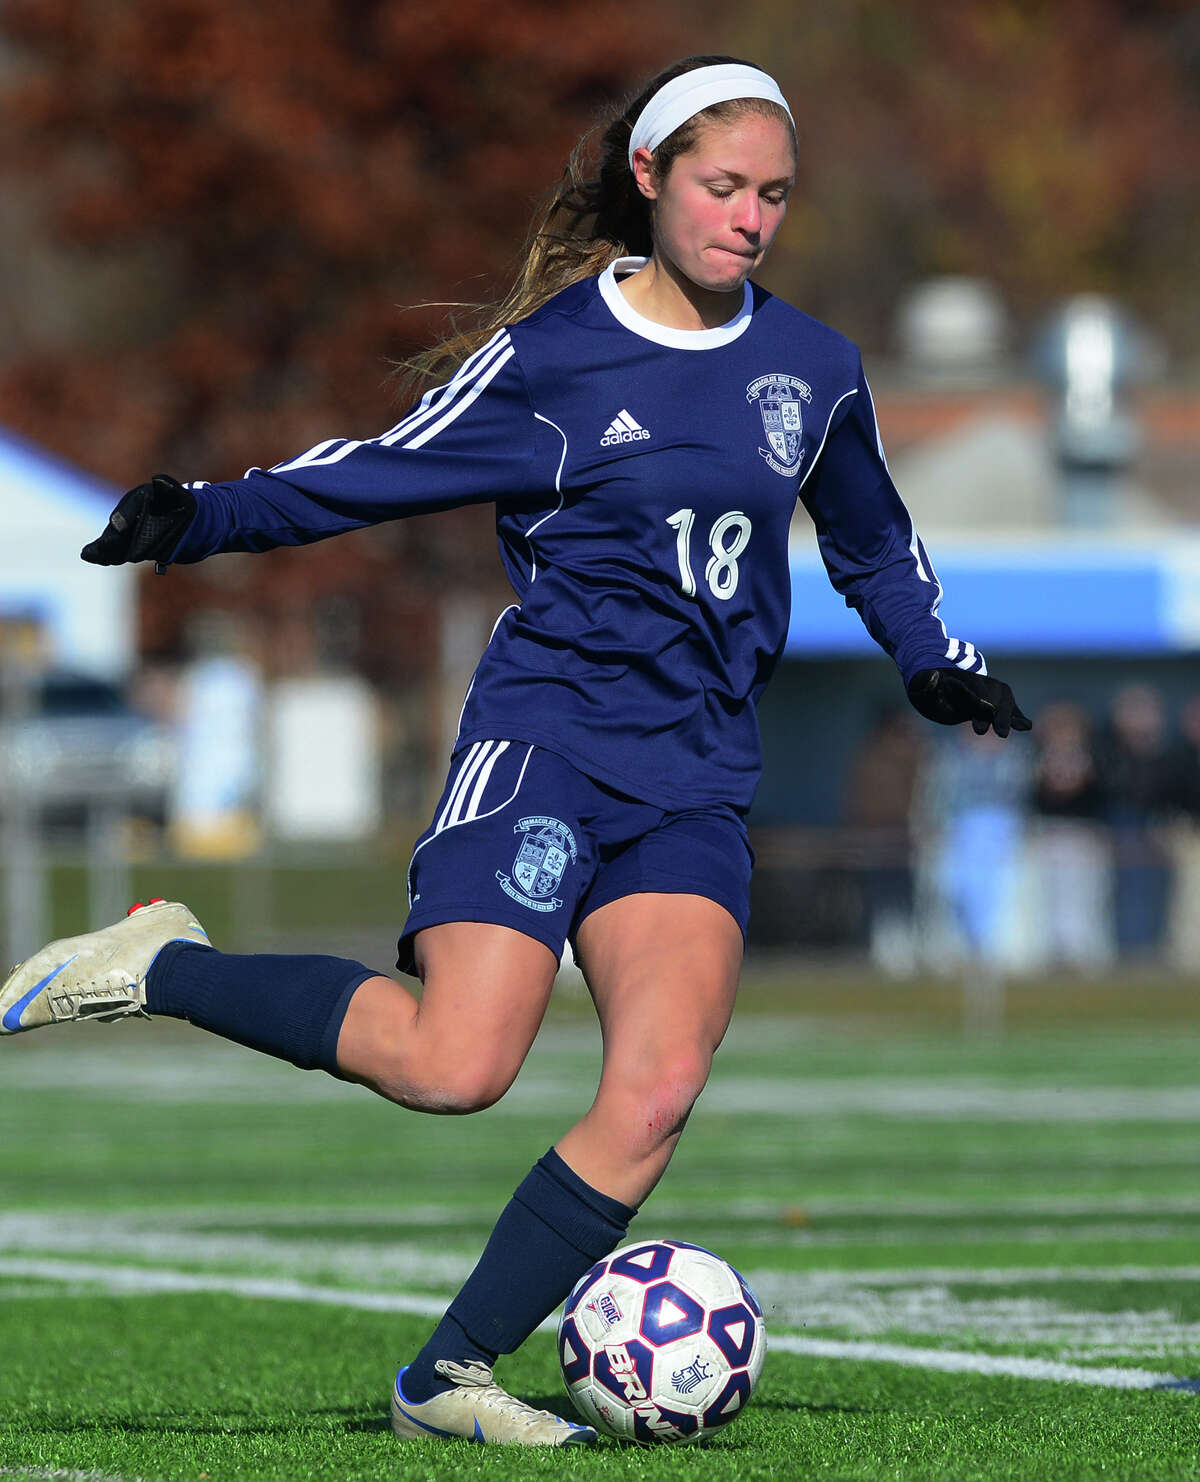 Class L CIAC state girls soccer championship action between Immaculate and Avon in West Haven, Conn. on Saturday Nov. 15, 2014. Immaculate No. 18 Caitlyn Linden.